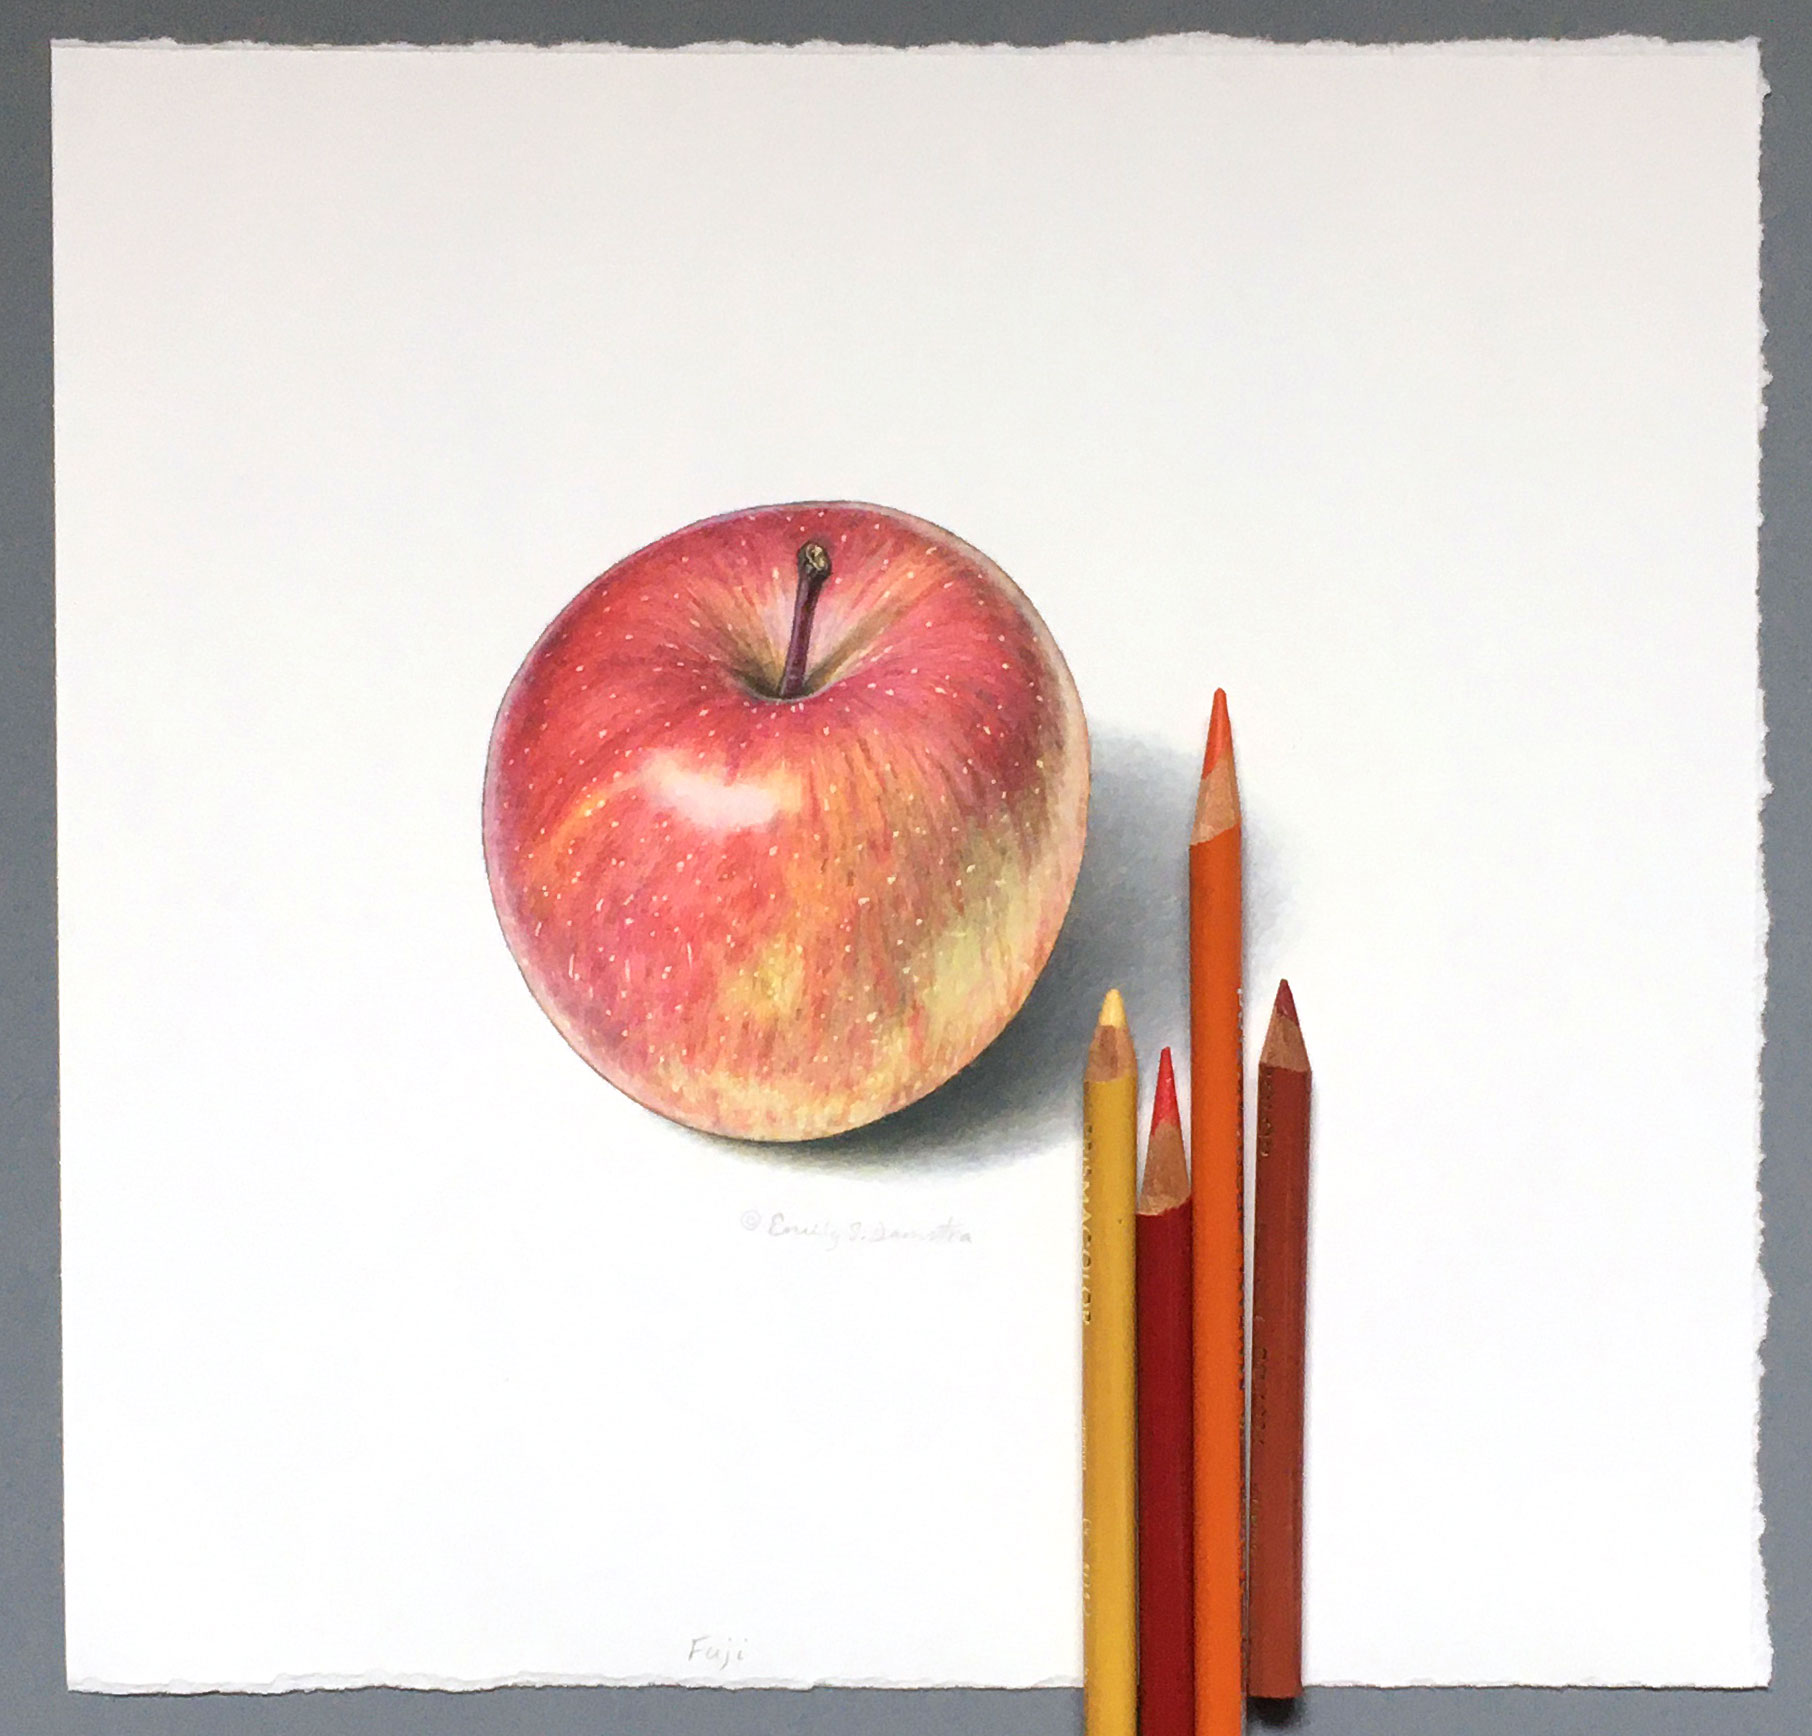 How to Draw an Apple | Envato Tuts+